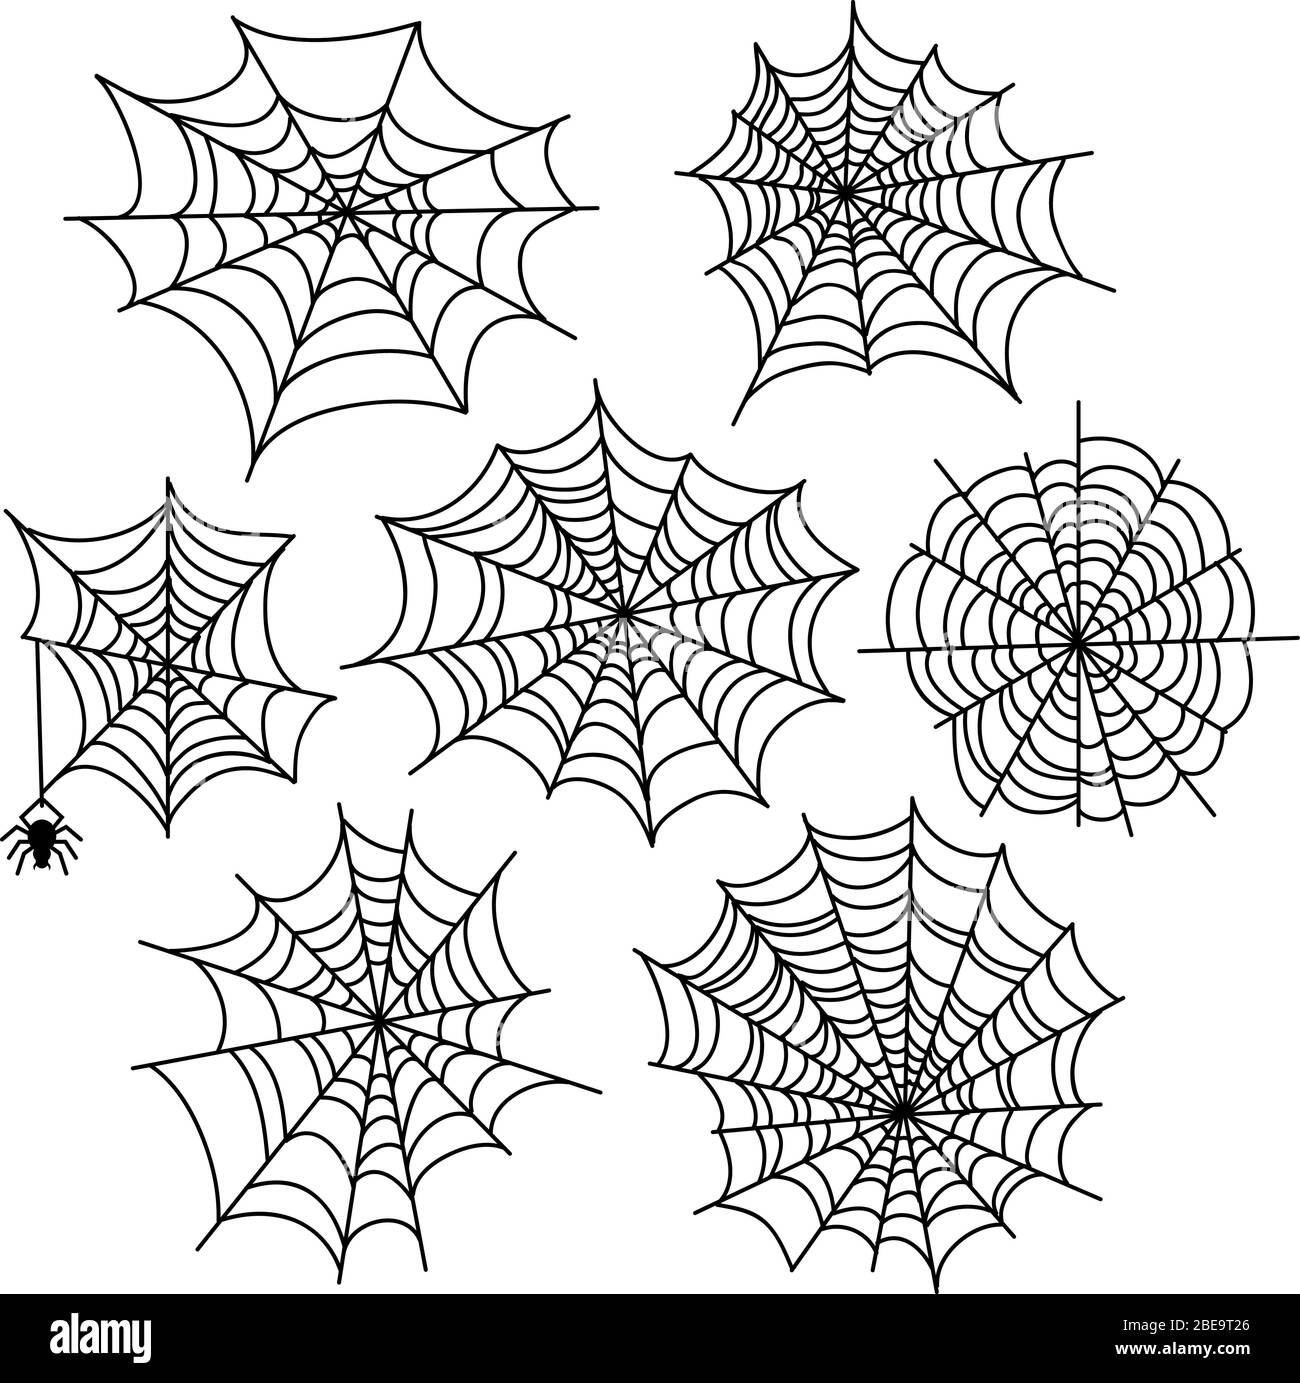 Halloween spider web vector set. Cobweb decoration elements isolated on white background Stock Vector